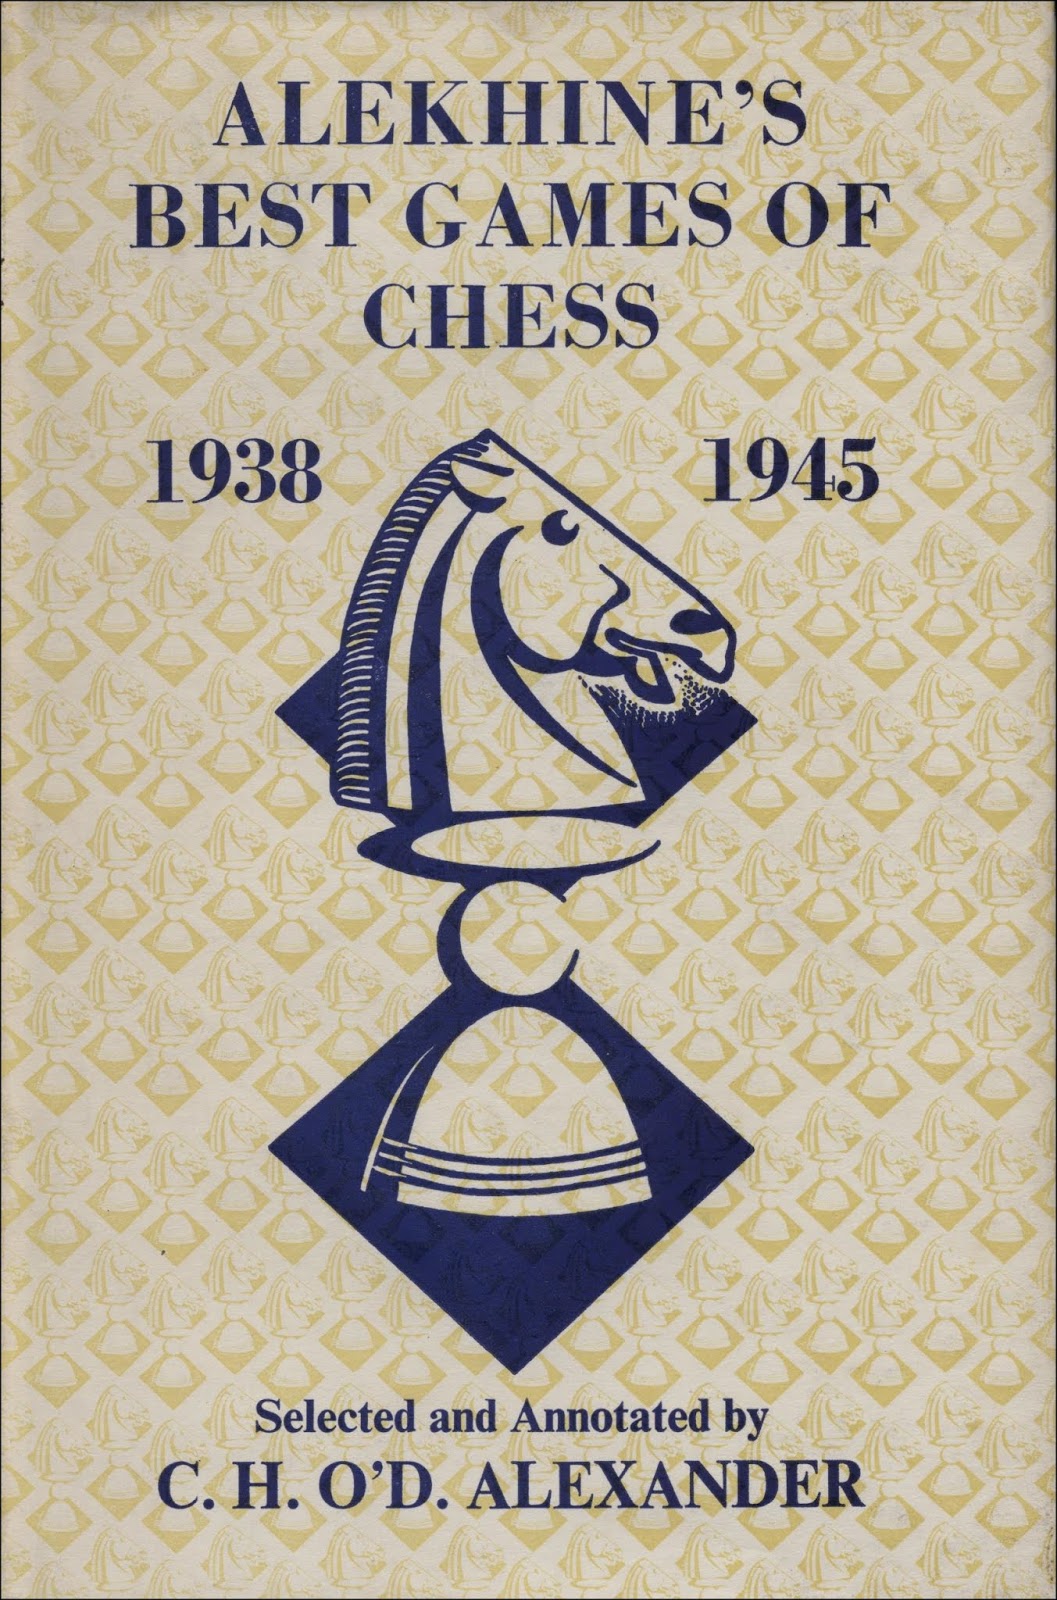 The Immortal Games of Capablanca. Selected by Fred Reinfeld